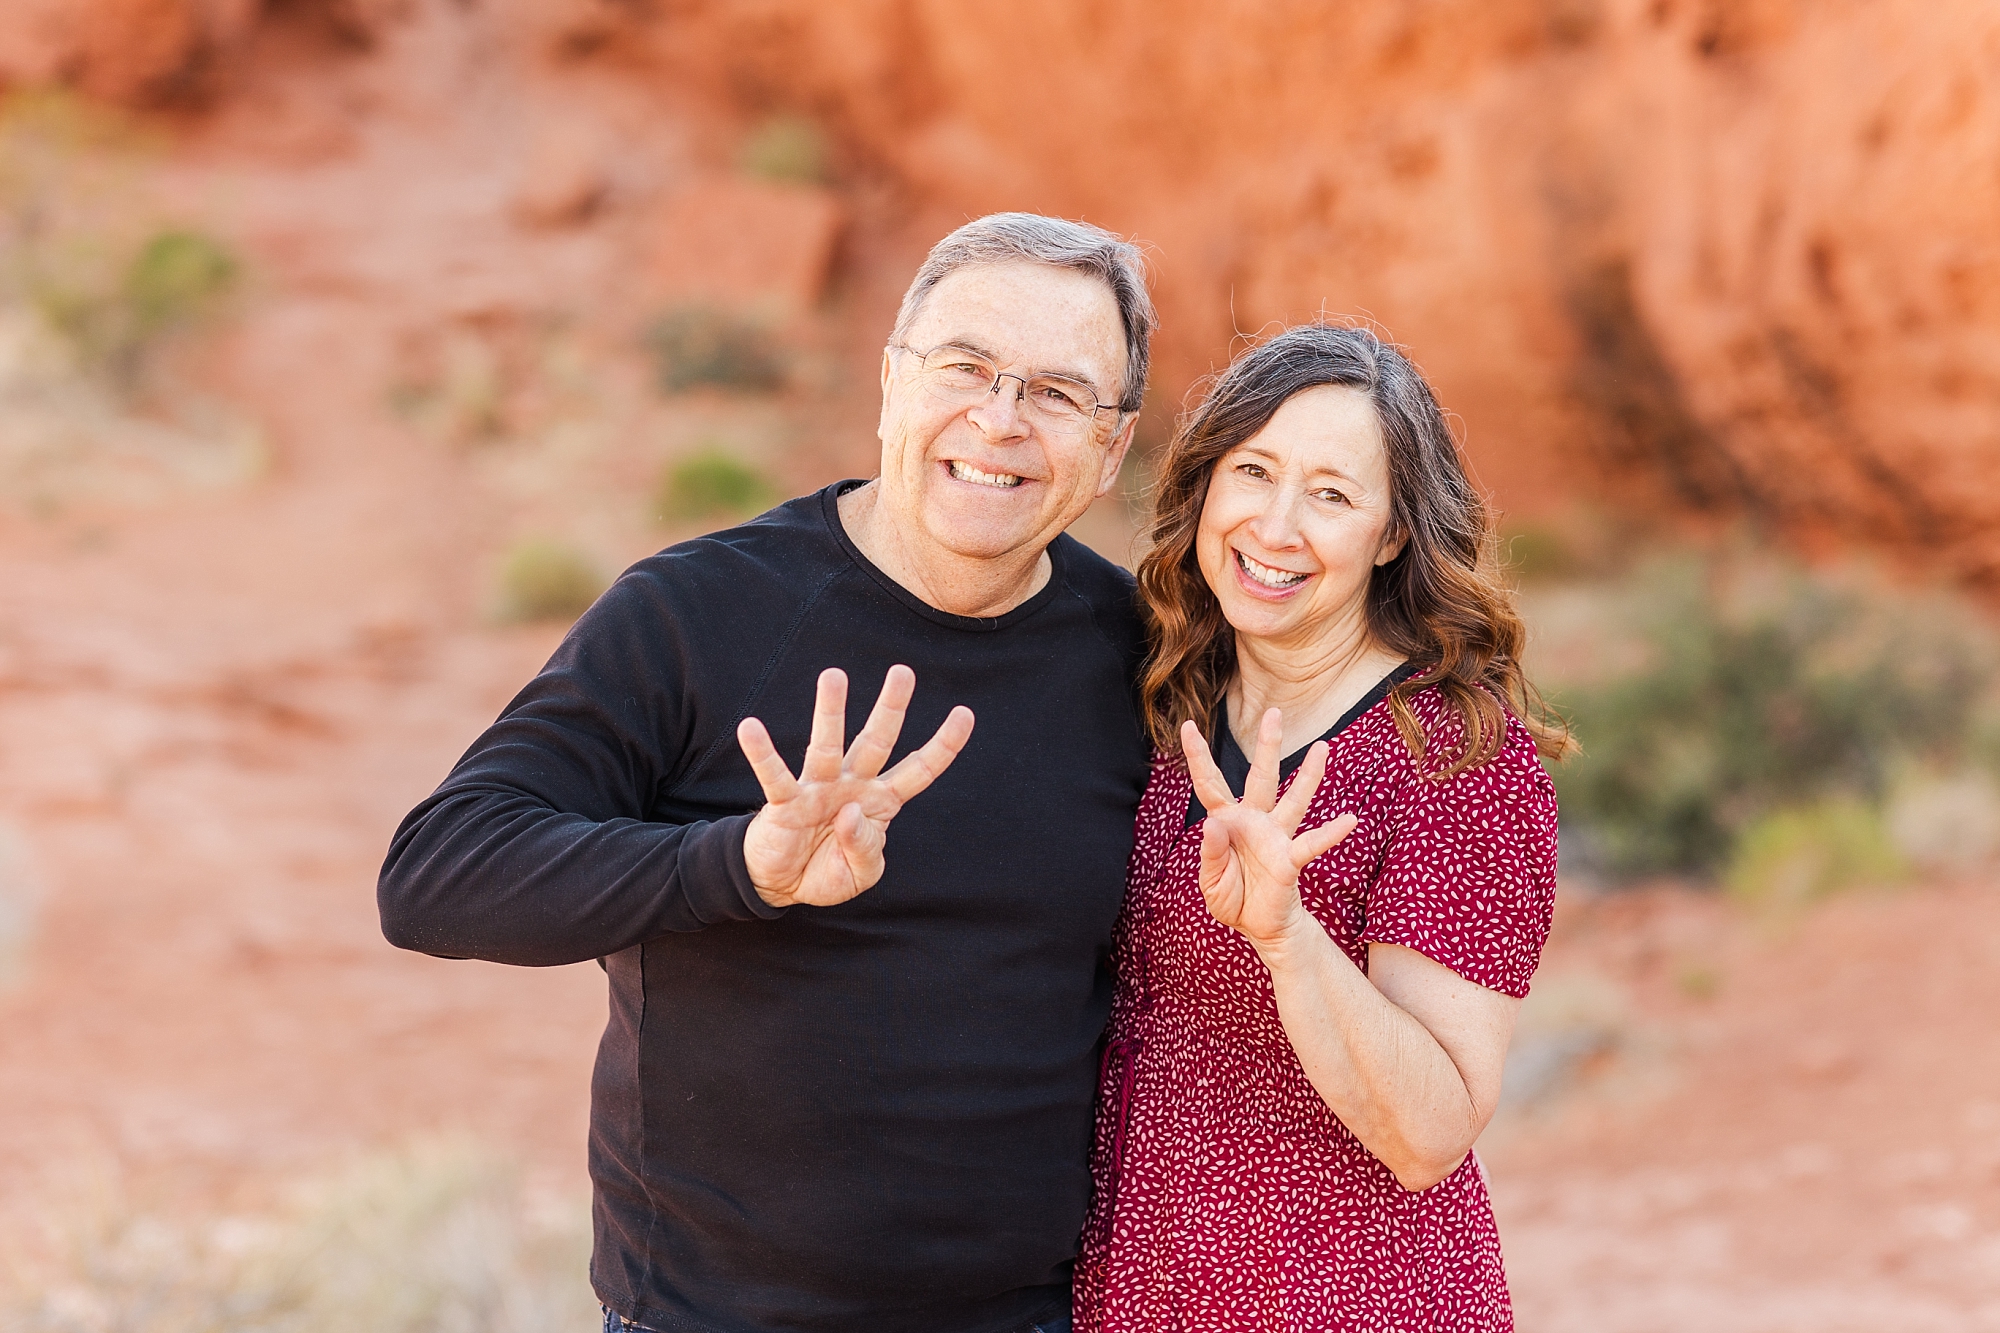 Anniversary photography session in St. George Utah